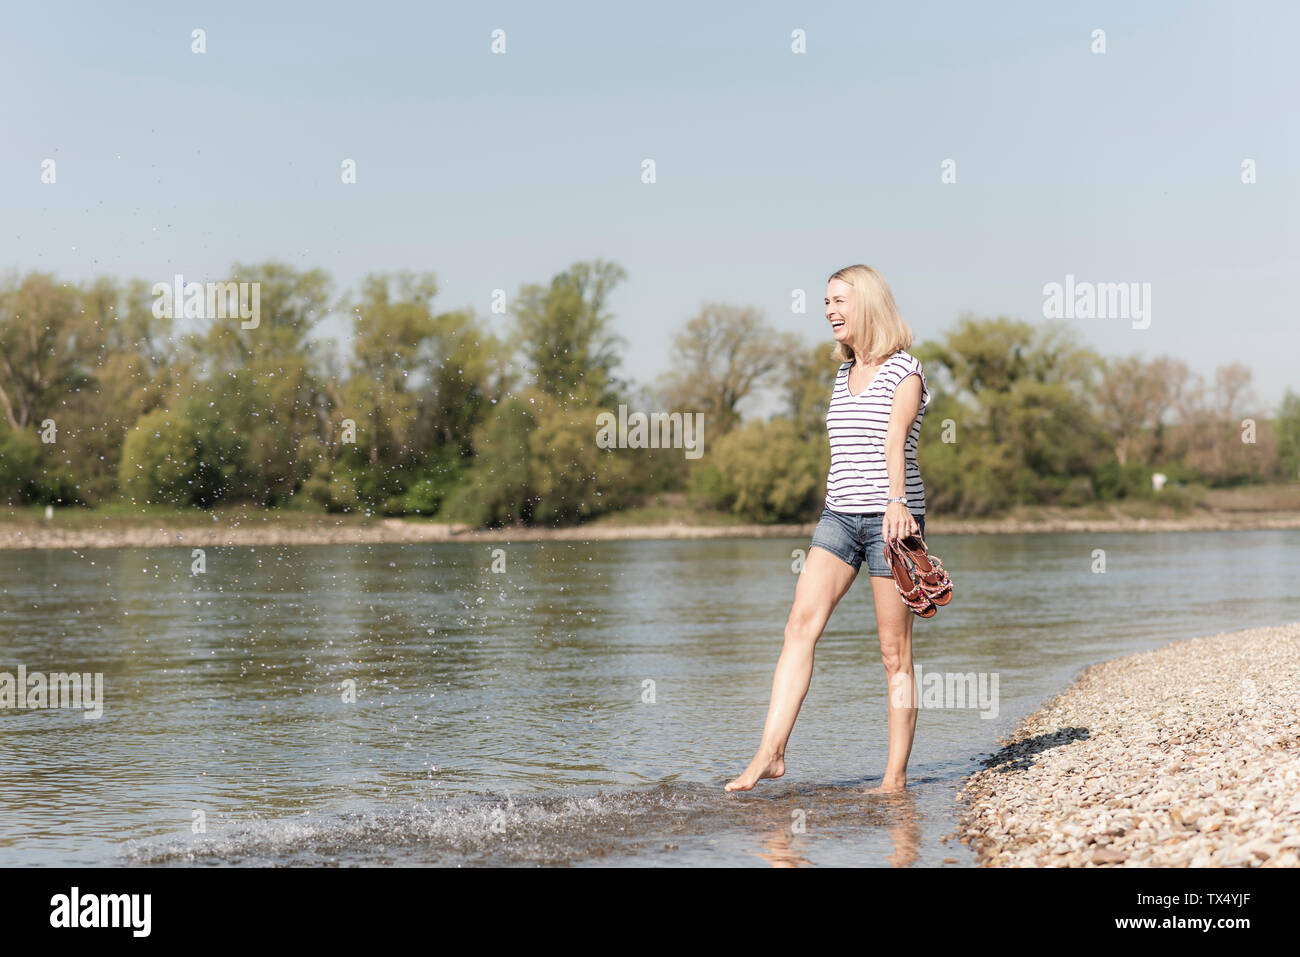 Carefree woman splashing in a river Banque D'Images